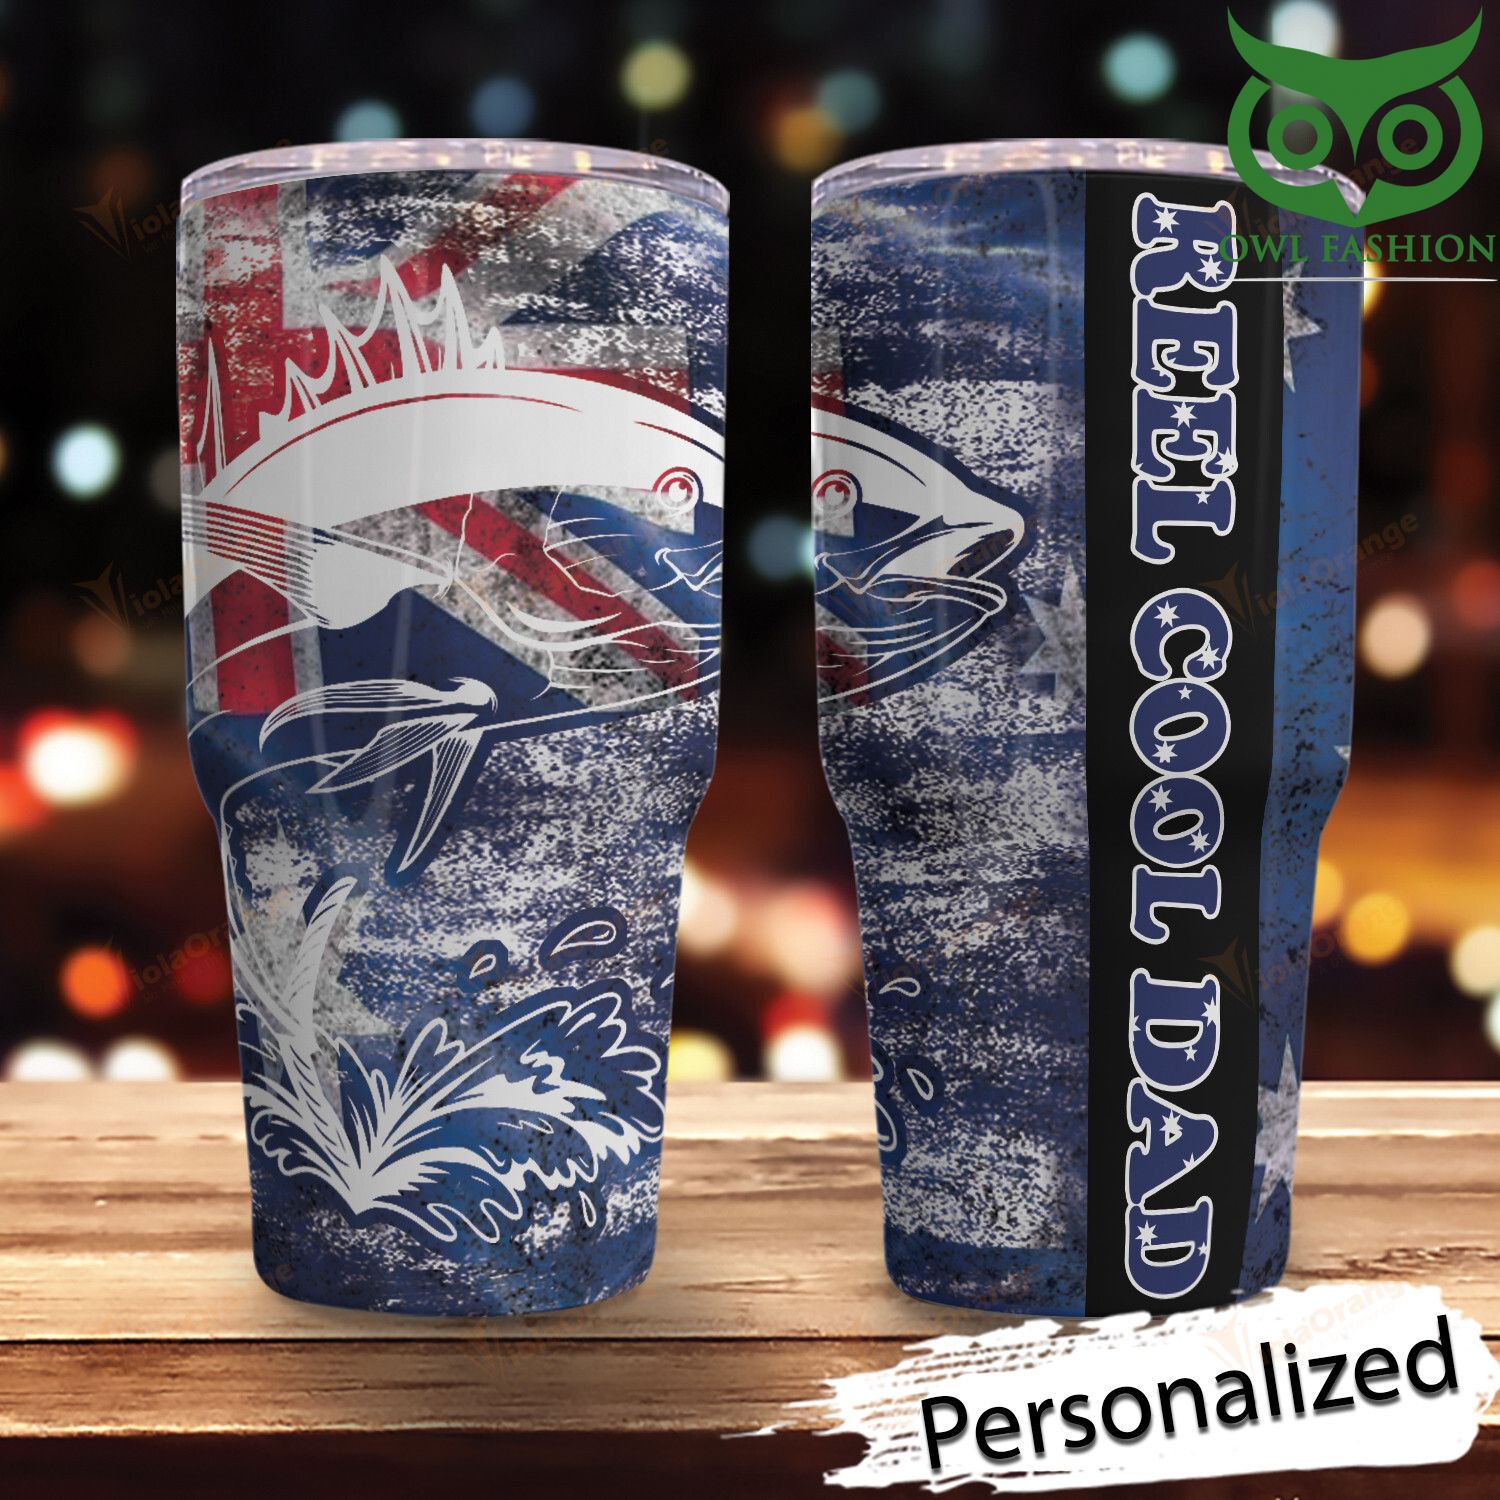 48 Aus Fishing Personalized stainless steel tumbler cup limited